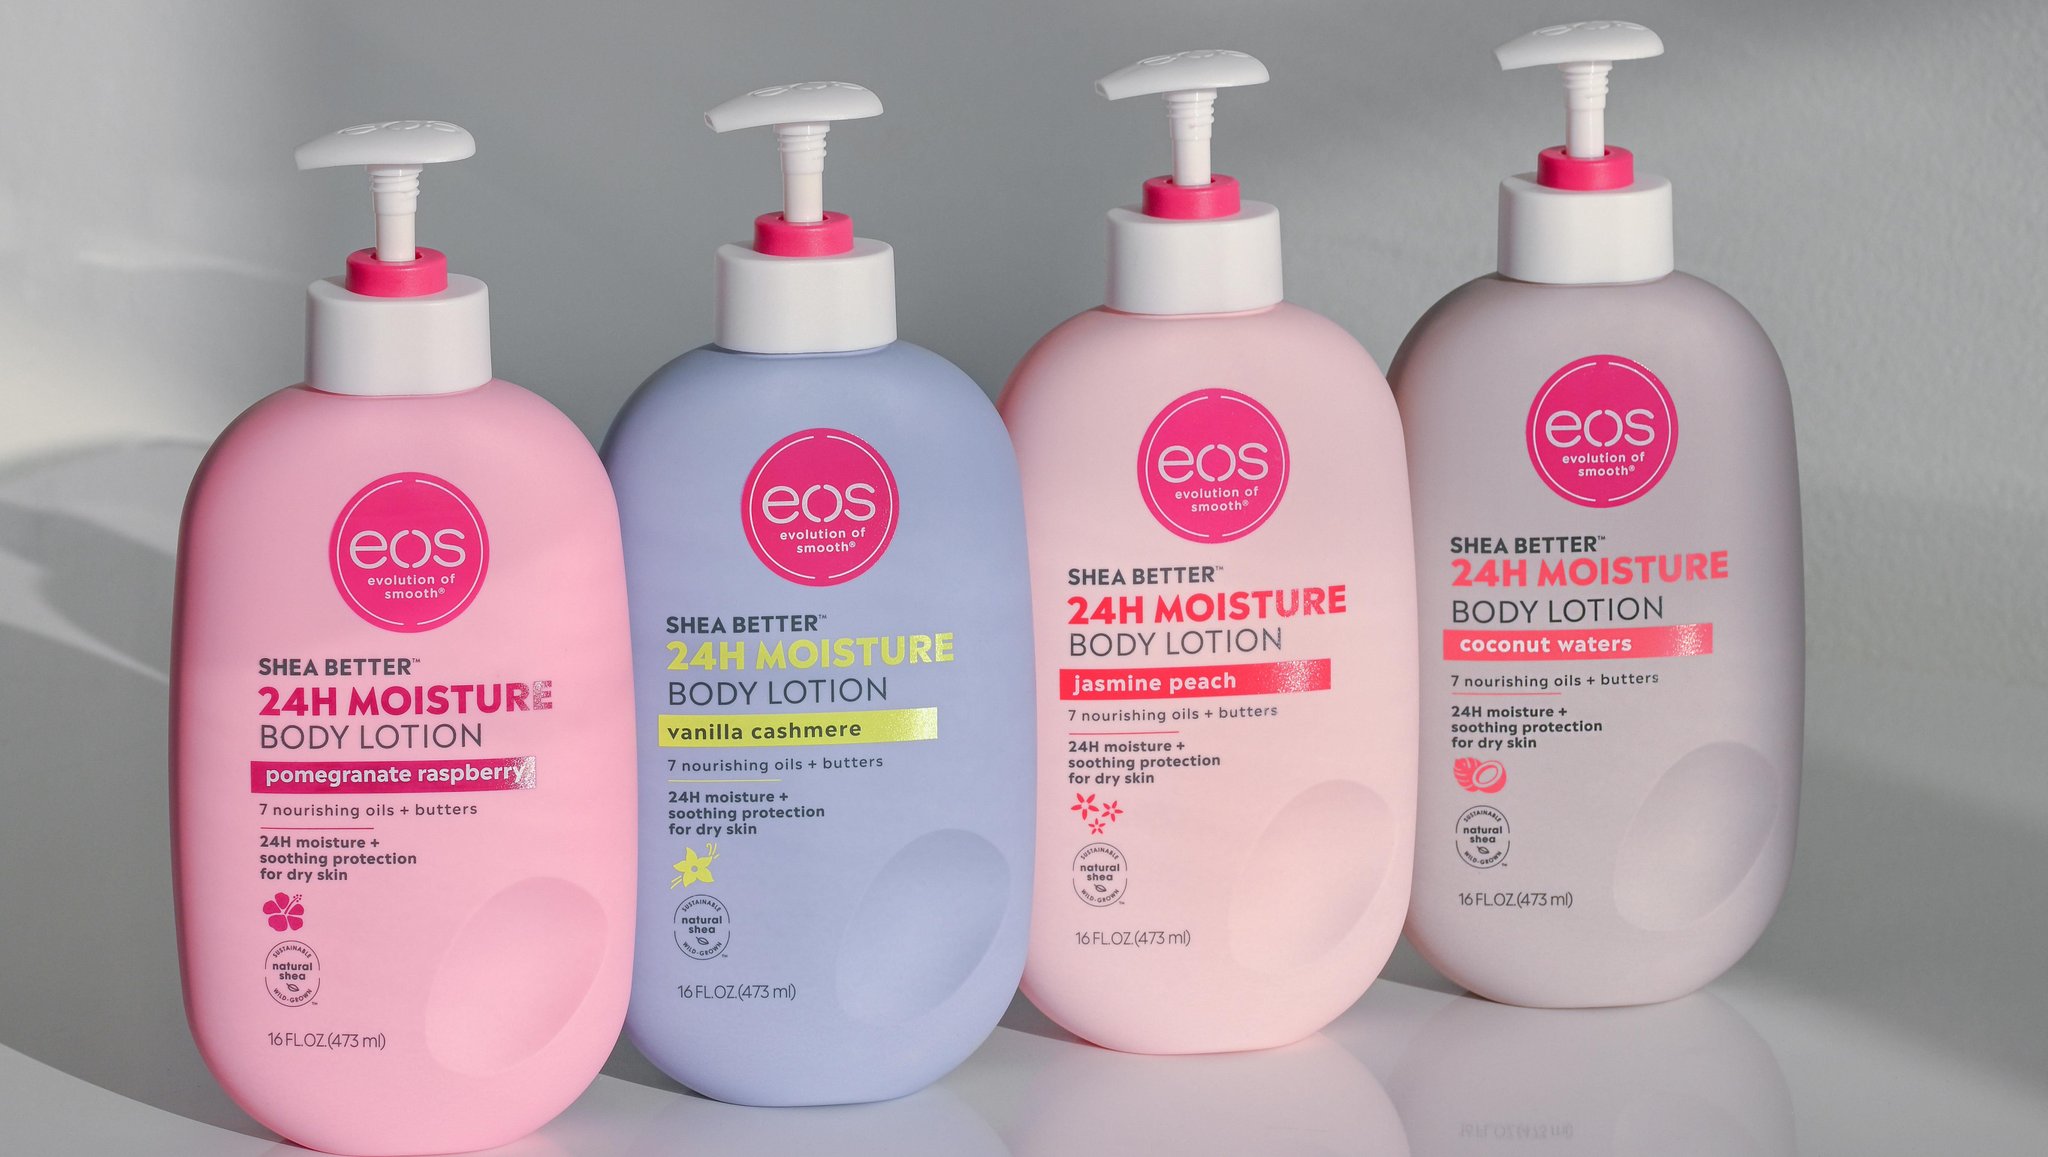 sextant Aquarium Zware vrachtwagen eos on Twitter: "✨NEWNESS ALERT✨ Introducing our NEW Shea Better 24H  Moisture Body Lotions, a lightweight, fast-absorbing formula infused with 7  nourishing oils and butters for 24 hours of moisture and soothing